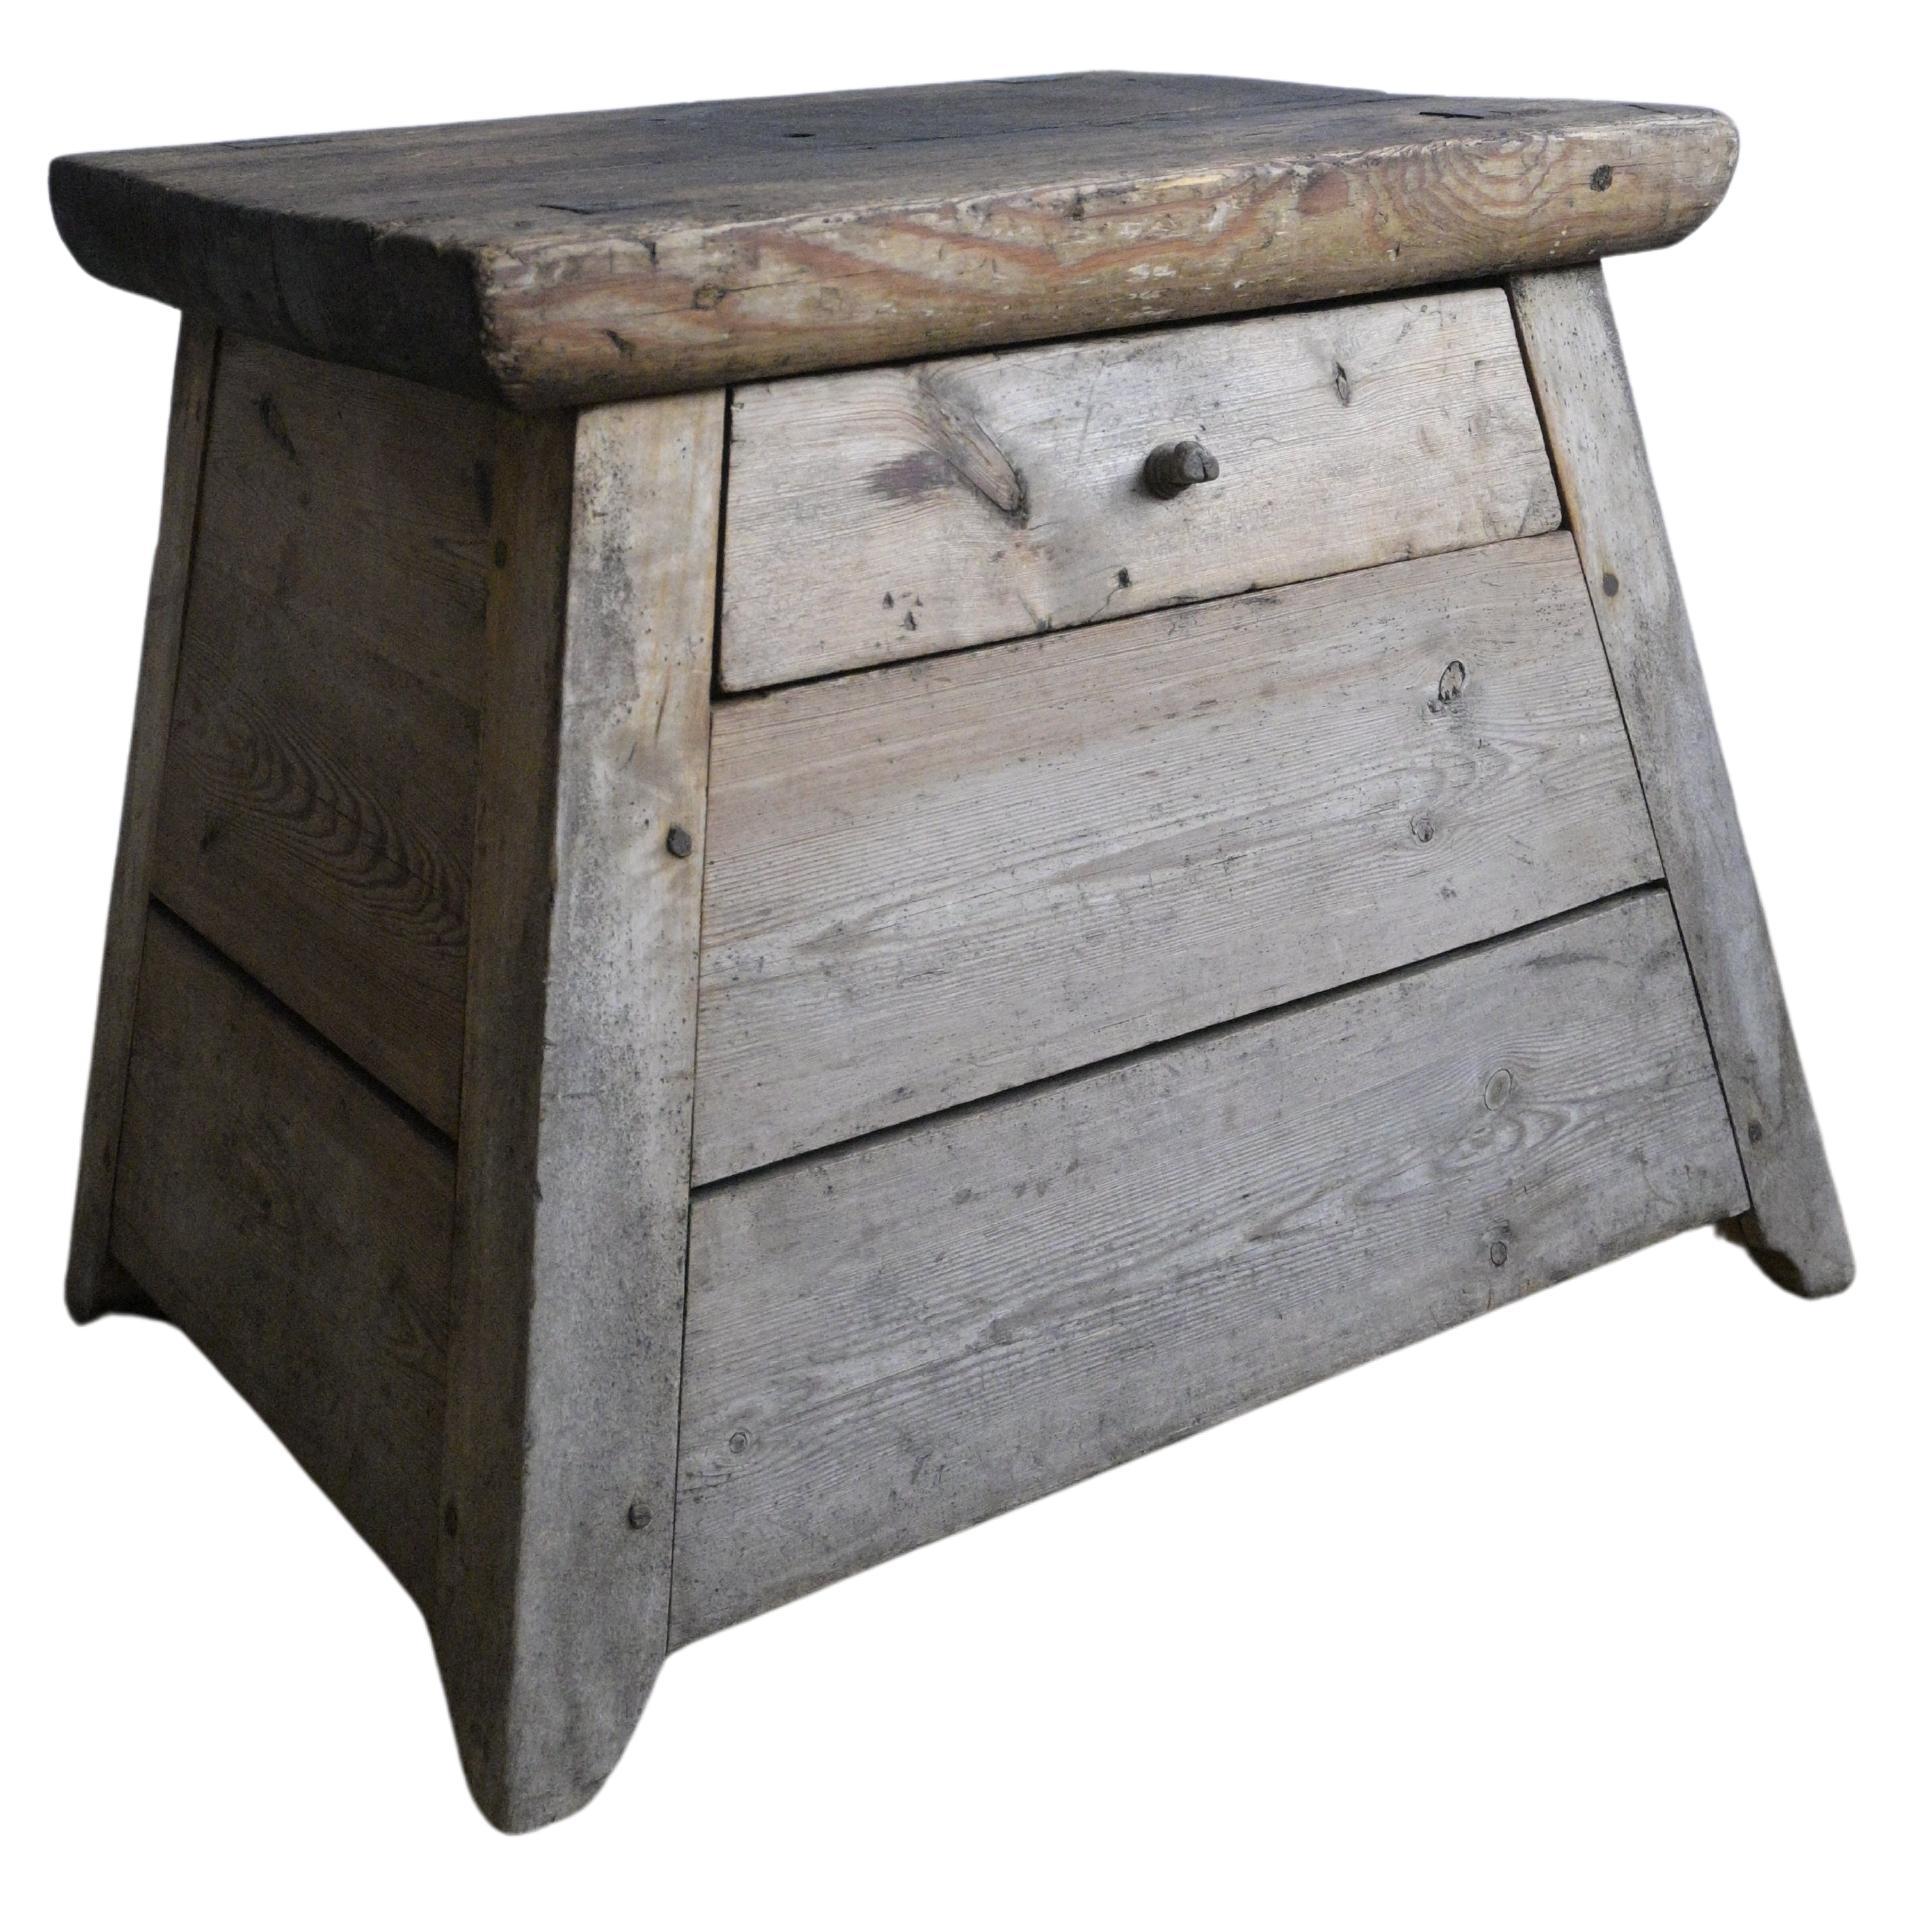 Swedish Workshop Side Table late 19th century For Sale